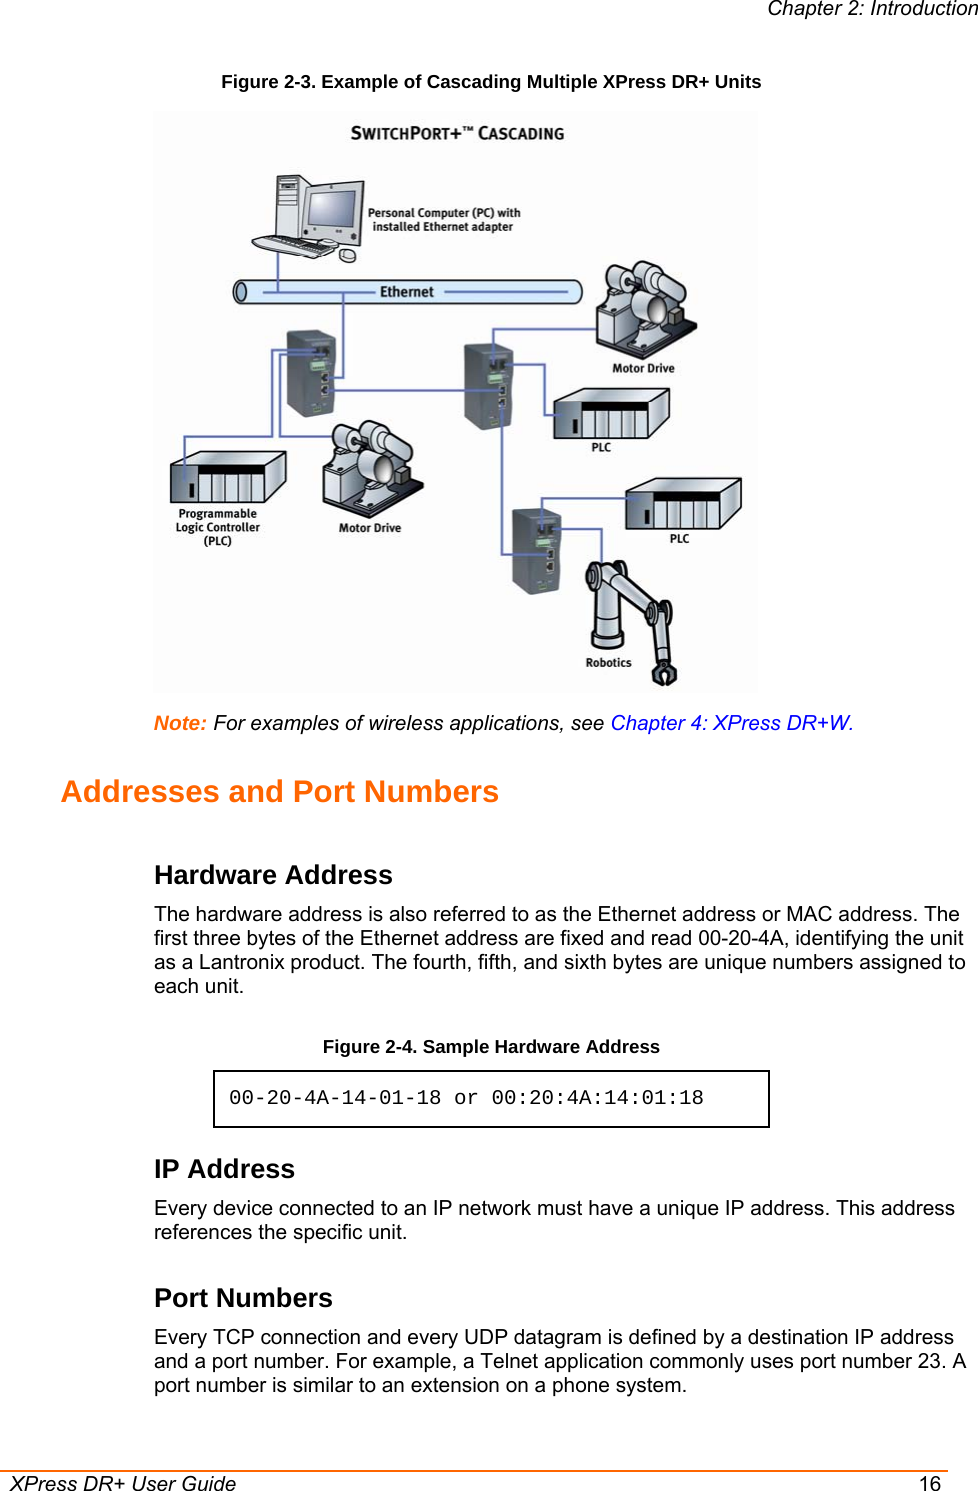 Chapter 2: Introduction  XPress DR+ User Guide  16 Figure 2-3. Example of Cascading Multiple XPress DR+ Units   Note: For examples of wireless applications, see Chapter 4: XPress DR+W. Addresses and Port Numbers Hardware Address The hardware address is also referred to as the Ethernet address or MAC address. The first three bytes of the Ethernet address are fixed and read 00-20-4A, identifying the unit as a Lantronix product. The fourth, fifth, and sixth bytes are unique numbers assigned to each unit. Figure 2-4. Sample Hardware Address 00-20-4A-14-01-18 or 00:20:4A:14:01:18 IP Address Every device connected to an IP network must have a unique IP address. This address references the specific unit.  Port Numbers Every TCP connection and every UDP datagram is defined by a destination IP address and a port number. For example, a Telnet application commonly uses port number 23. A port number is similar to an extension on a phone system. 